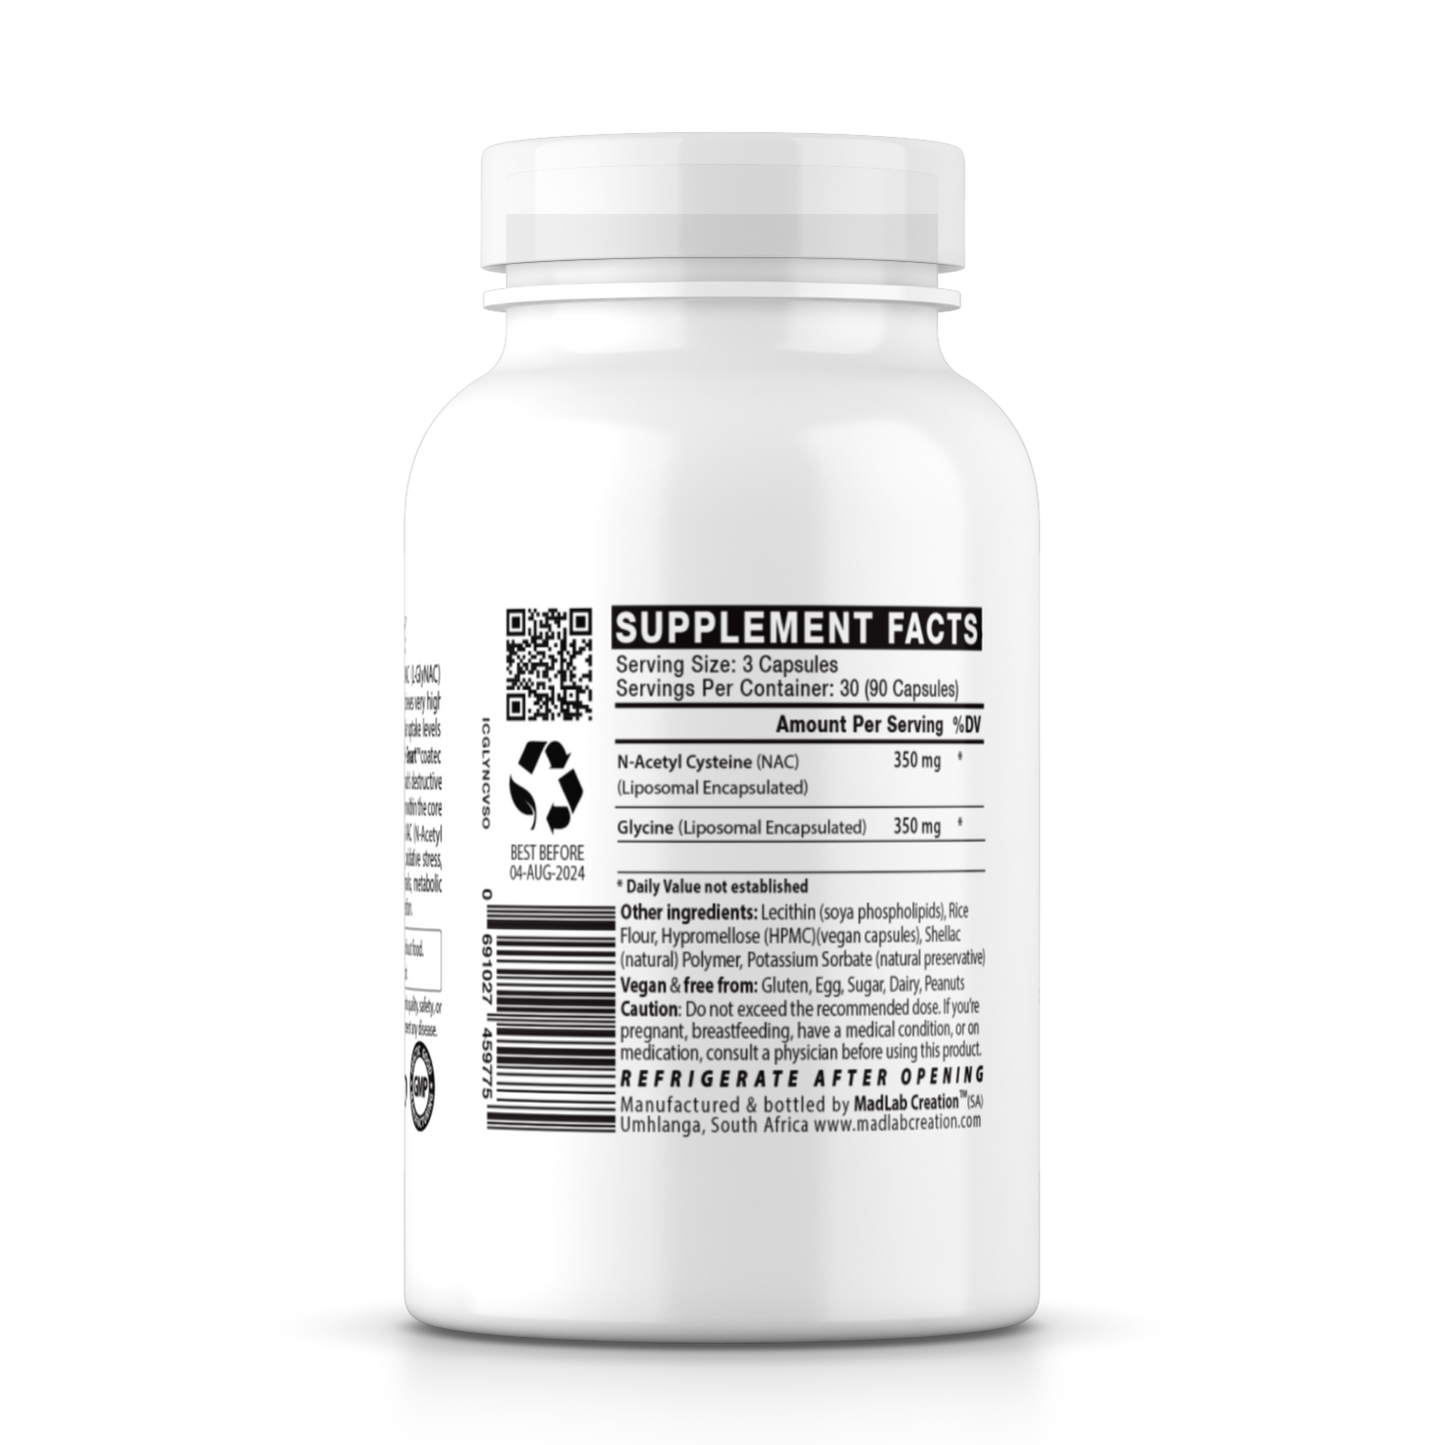 GlyNAC (Liposomal)(Glycine & NAC) 700mg with Targeted Delivery